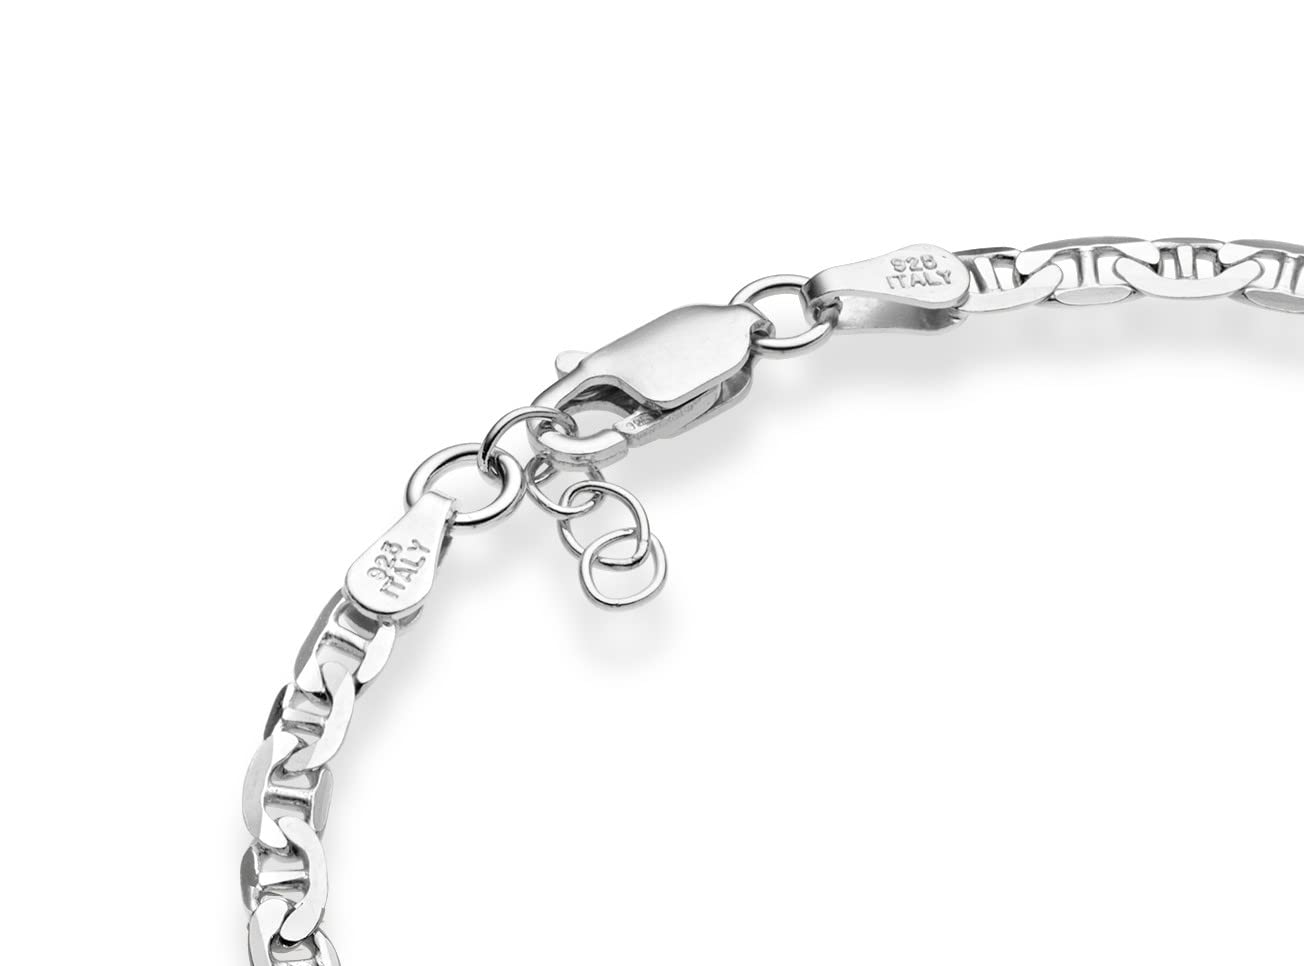 Miabella 925 Sterling Silver Italian 3mm, 4mm Solid Mariner Link Chain Bracelet for Men Women, Made in Italy